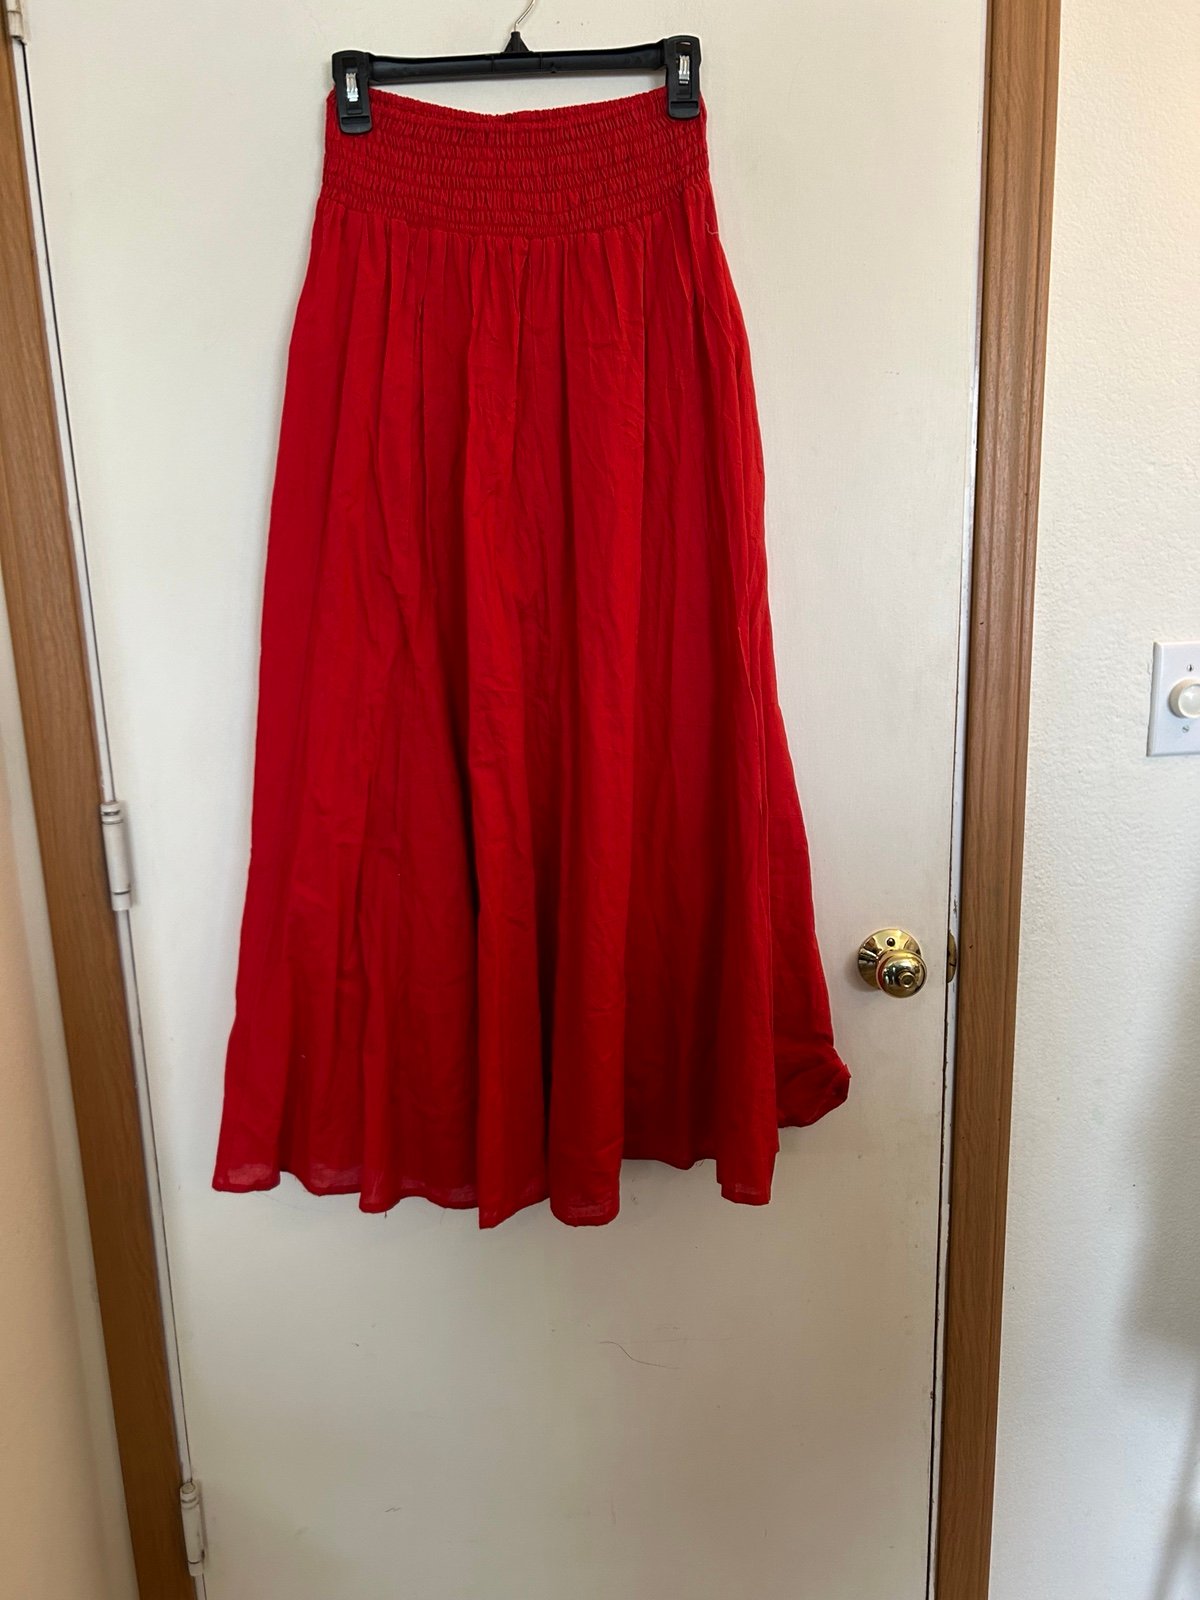 reasonable price NWT 100% Cotton Red stretch waist pull on maxi skirt pHUaPXZG5 hot sale